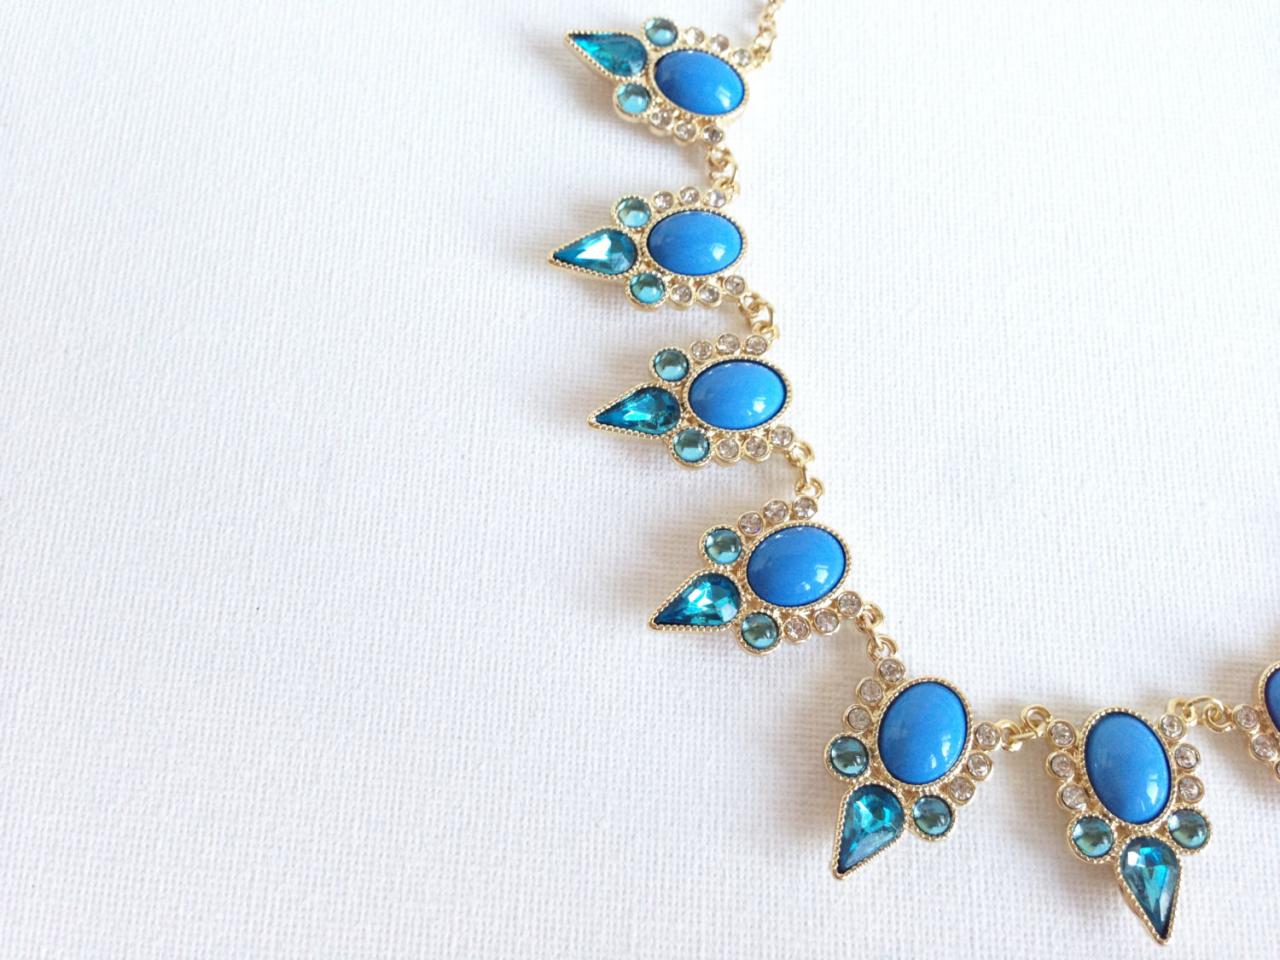 Blue Statement Necklace - Beaded Necklace - Crystal Necklace - Fancy - Gold Necklace